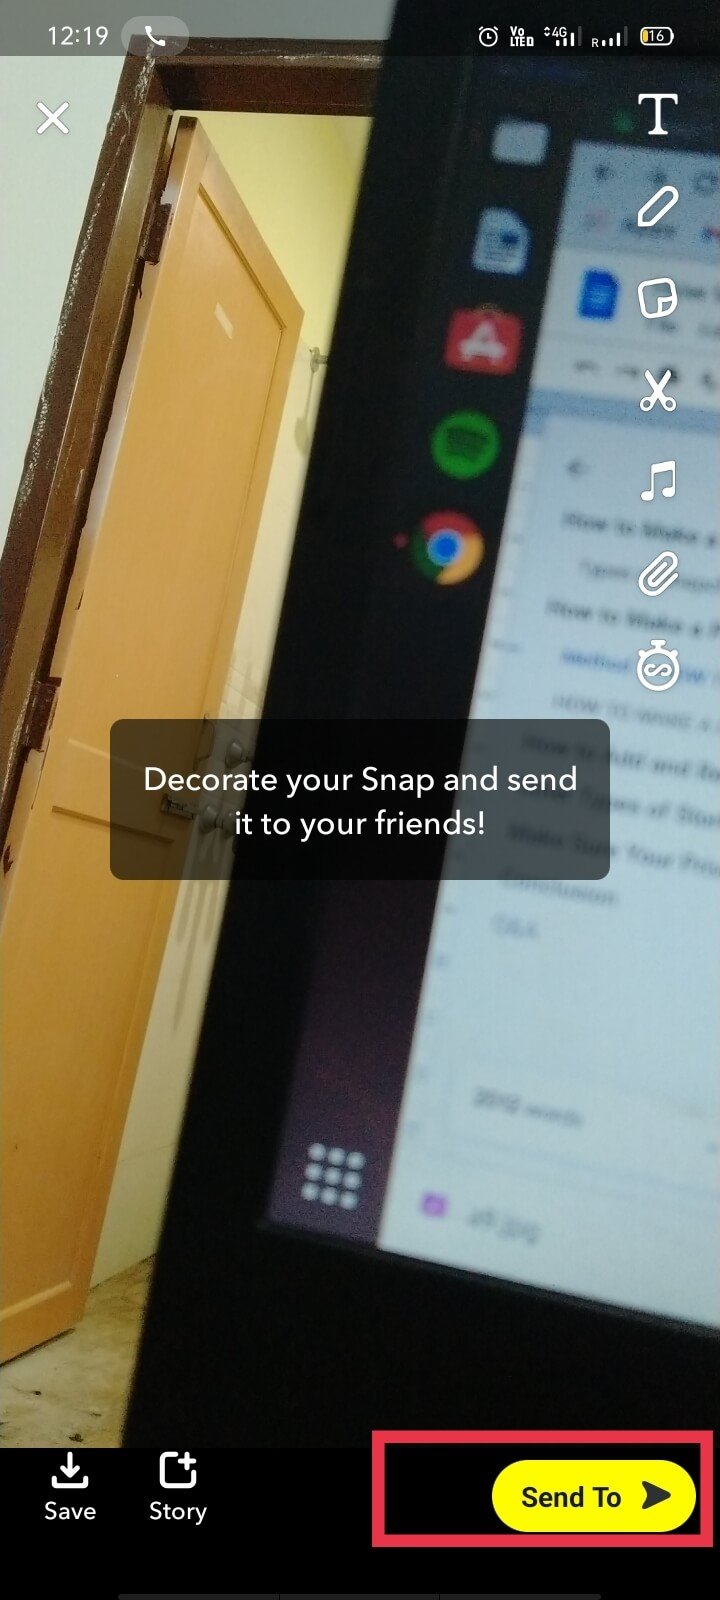 Once you upload or click a picture, tap the Send To option at the bottom-right on the screen.